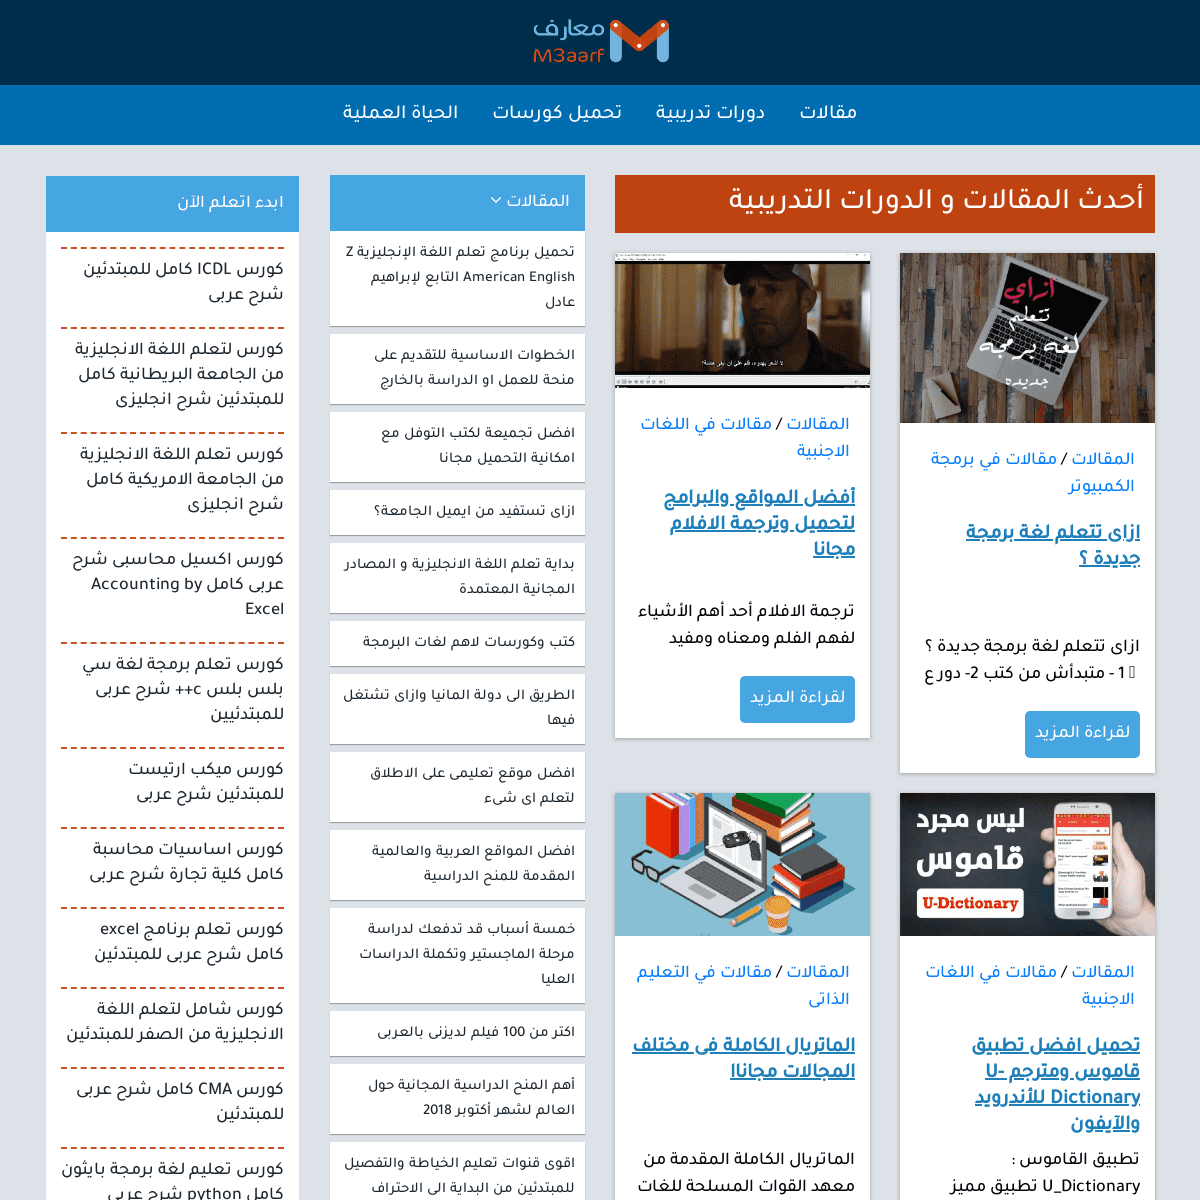 A complete backup of m3aarf.com